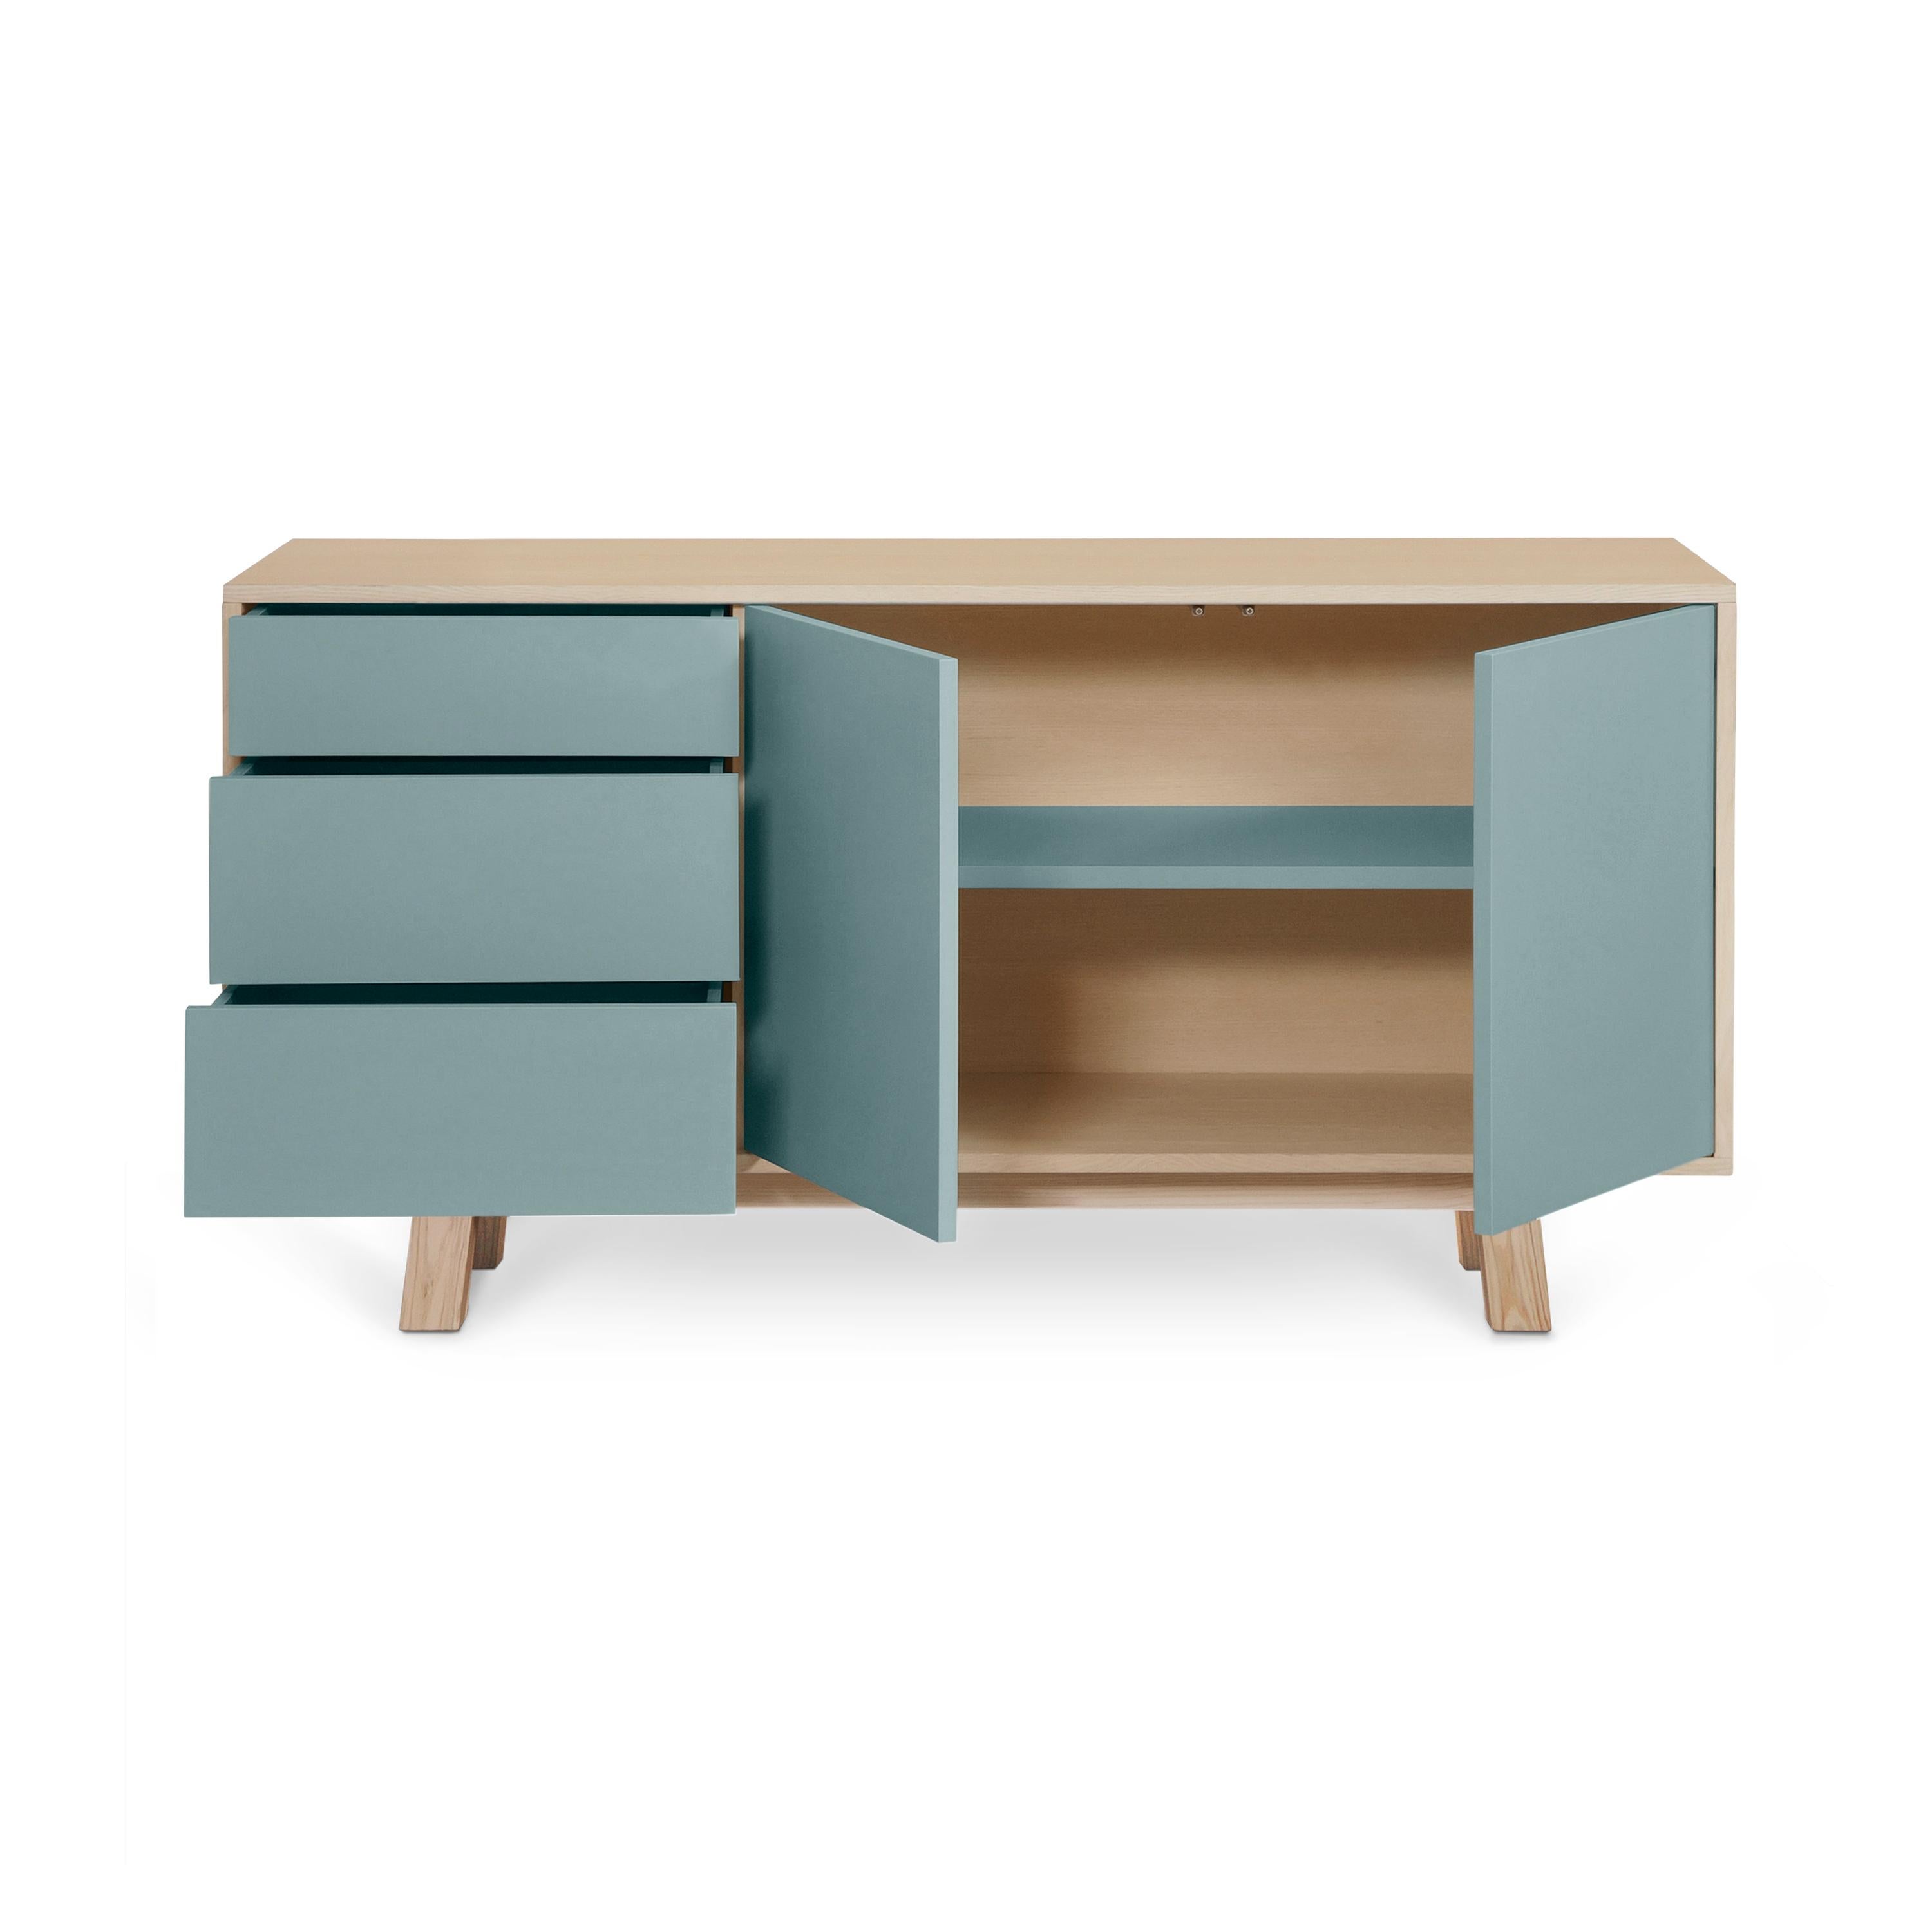 This 2 doors and 3 drawers sideboard is designed by Eric Gizard - Paris.

It is 100% made in France with solid ash wood, veneer and lacquered doors in MDF panels. 

Each door and each drawer opens with a 